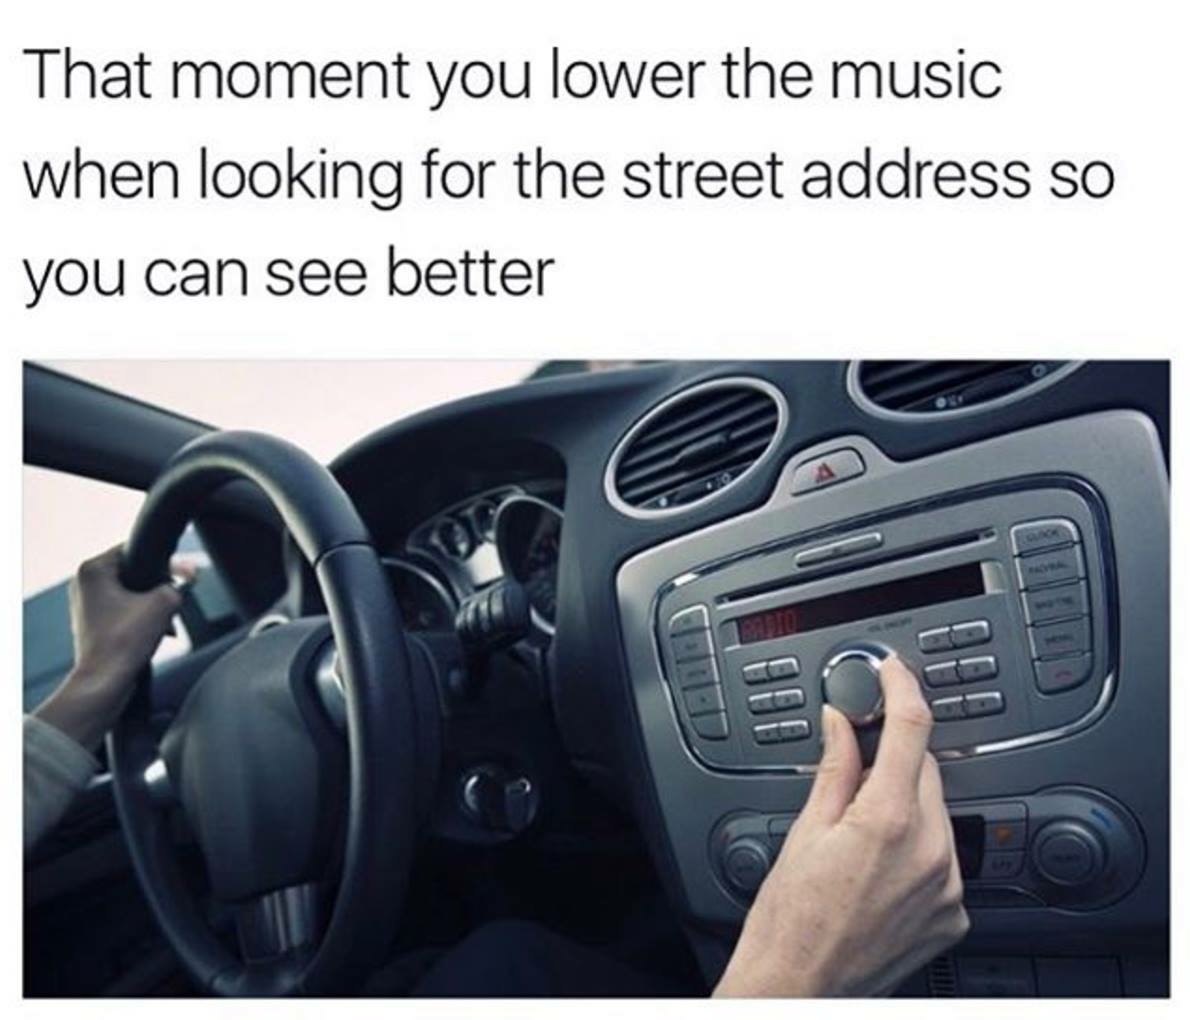 So true meme about how you turn down the music in your car to find the street address.